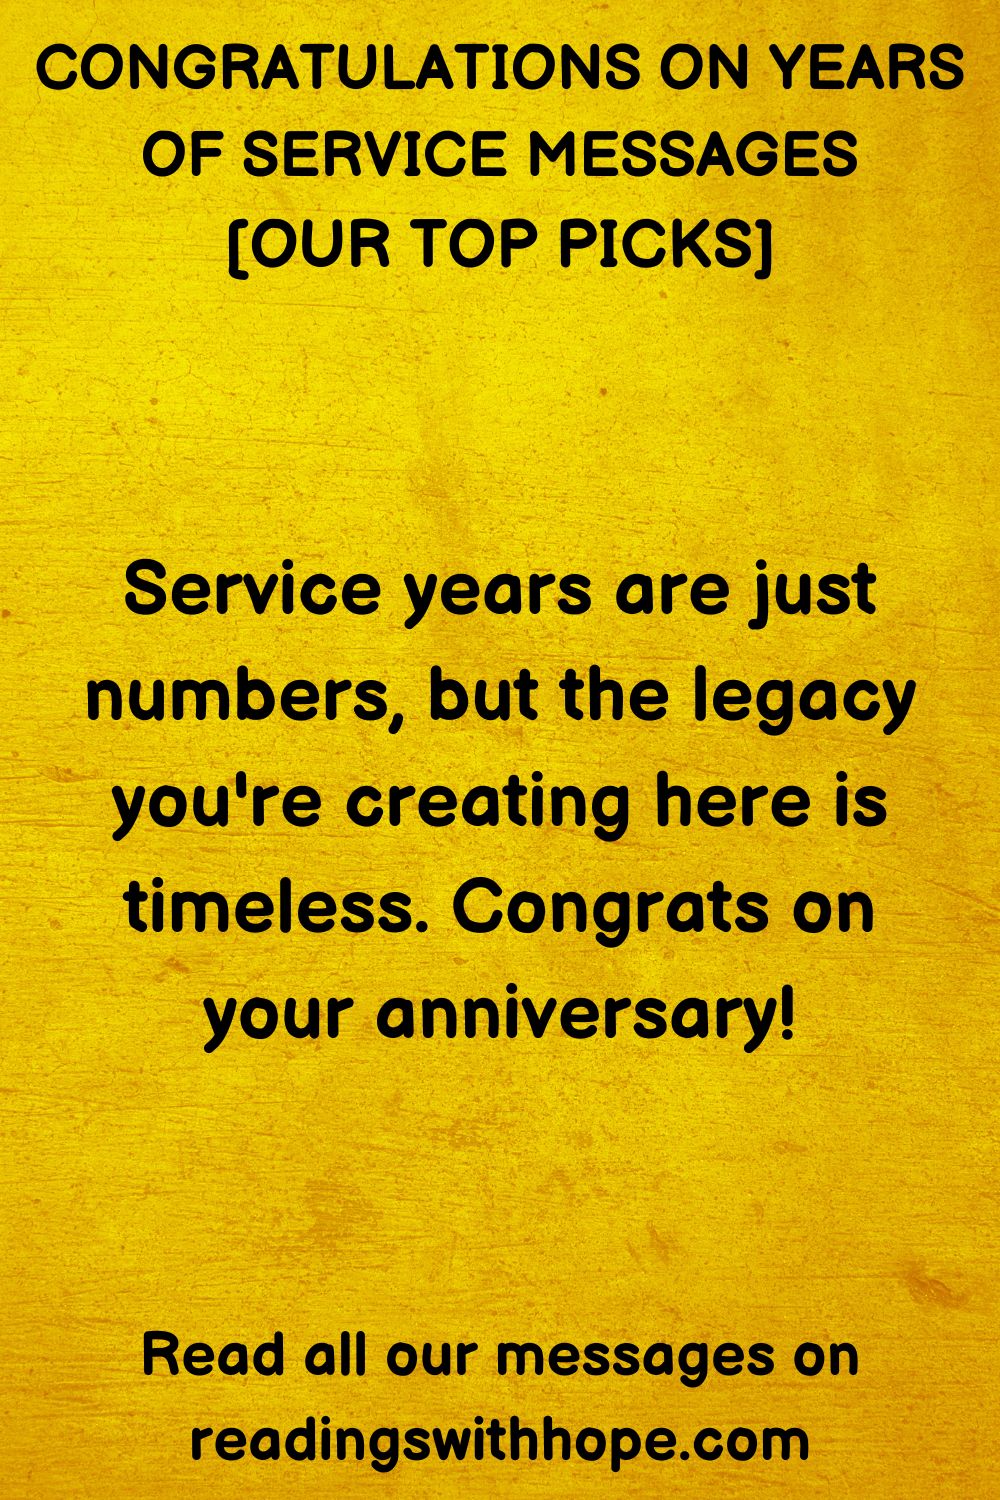 Congratulations on Years of Service Messages